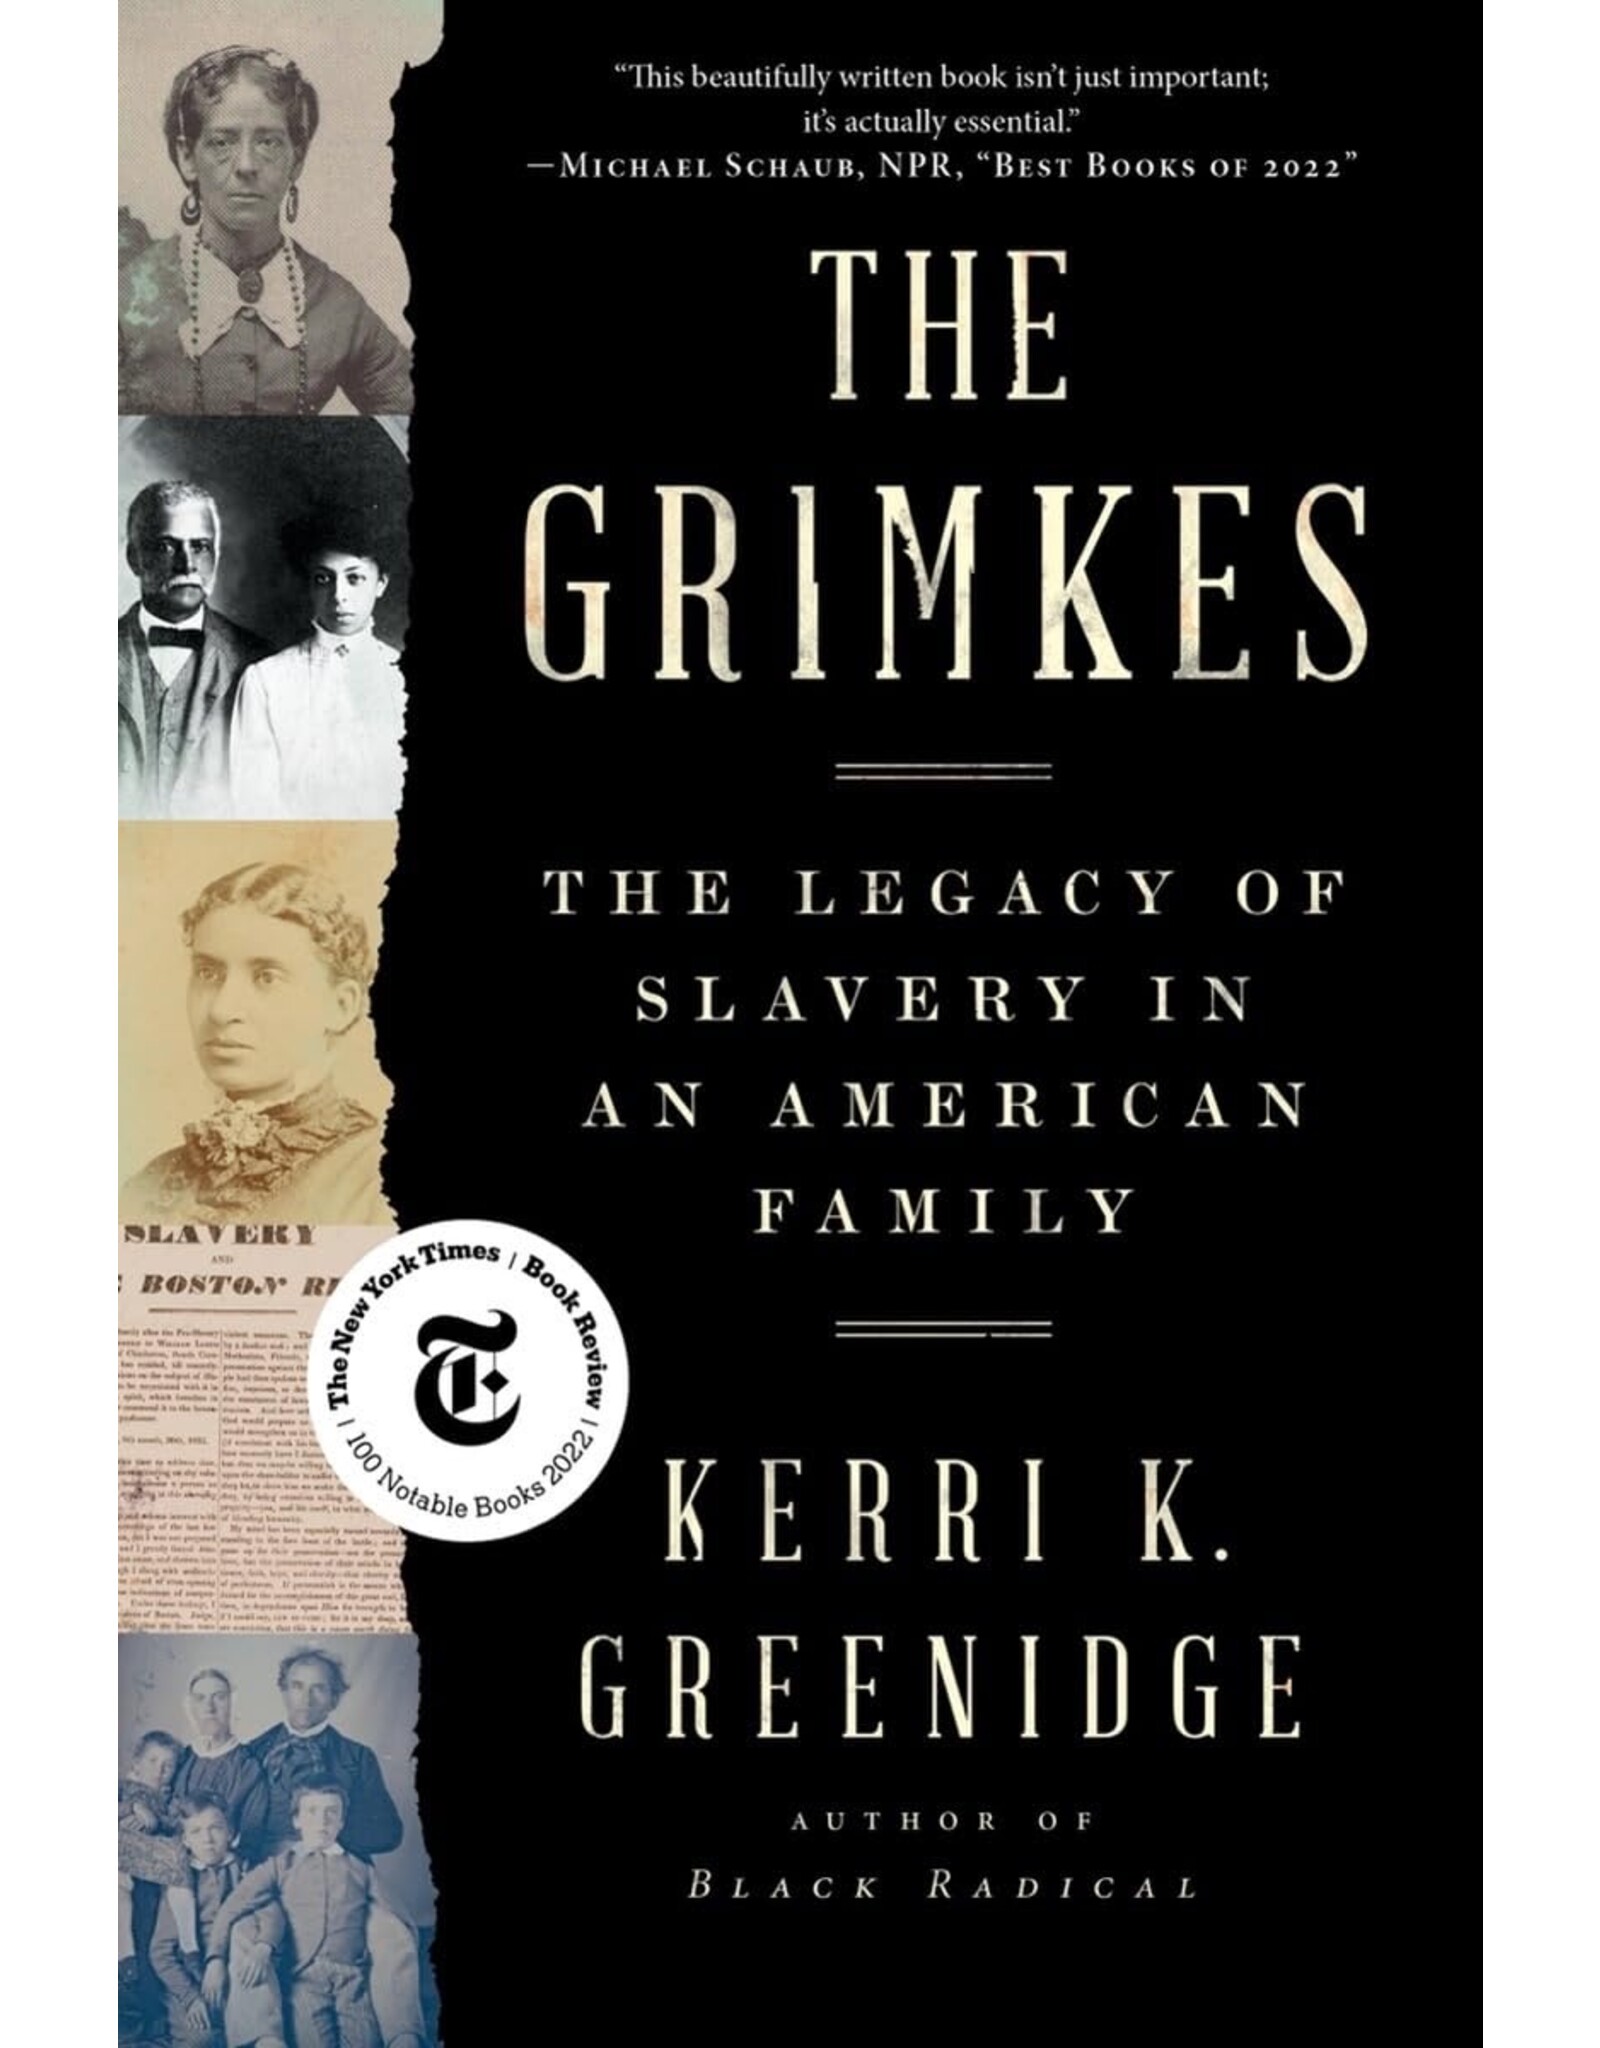 Non-Fiction: Slavery The Grimkes: The Legacy of Slavery in an American Family